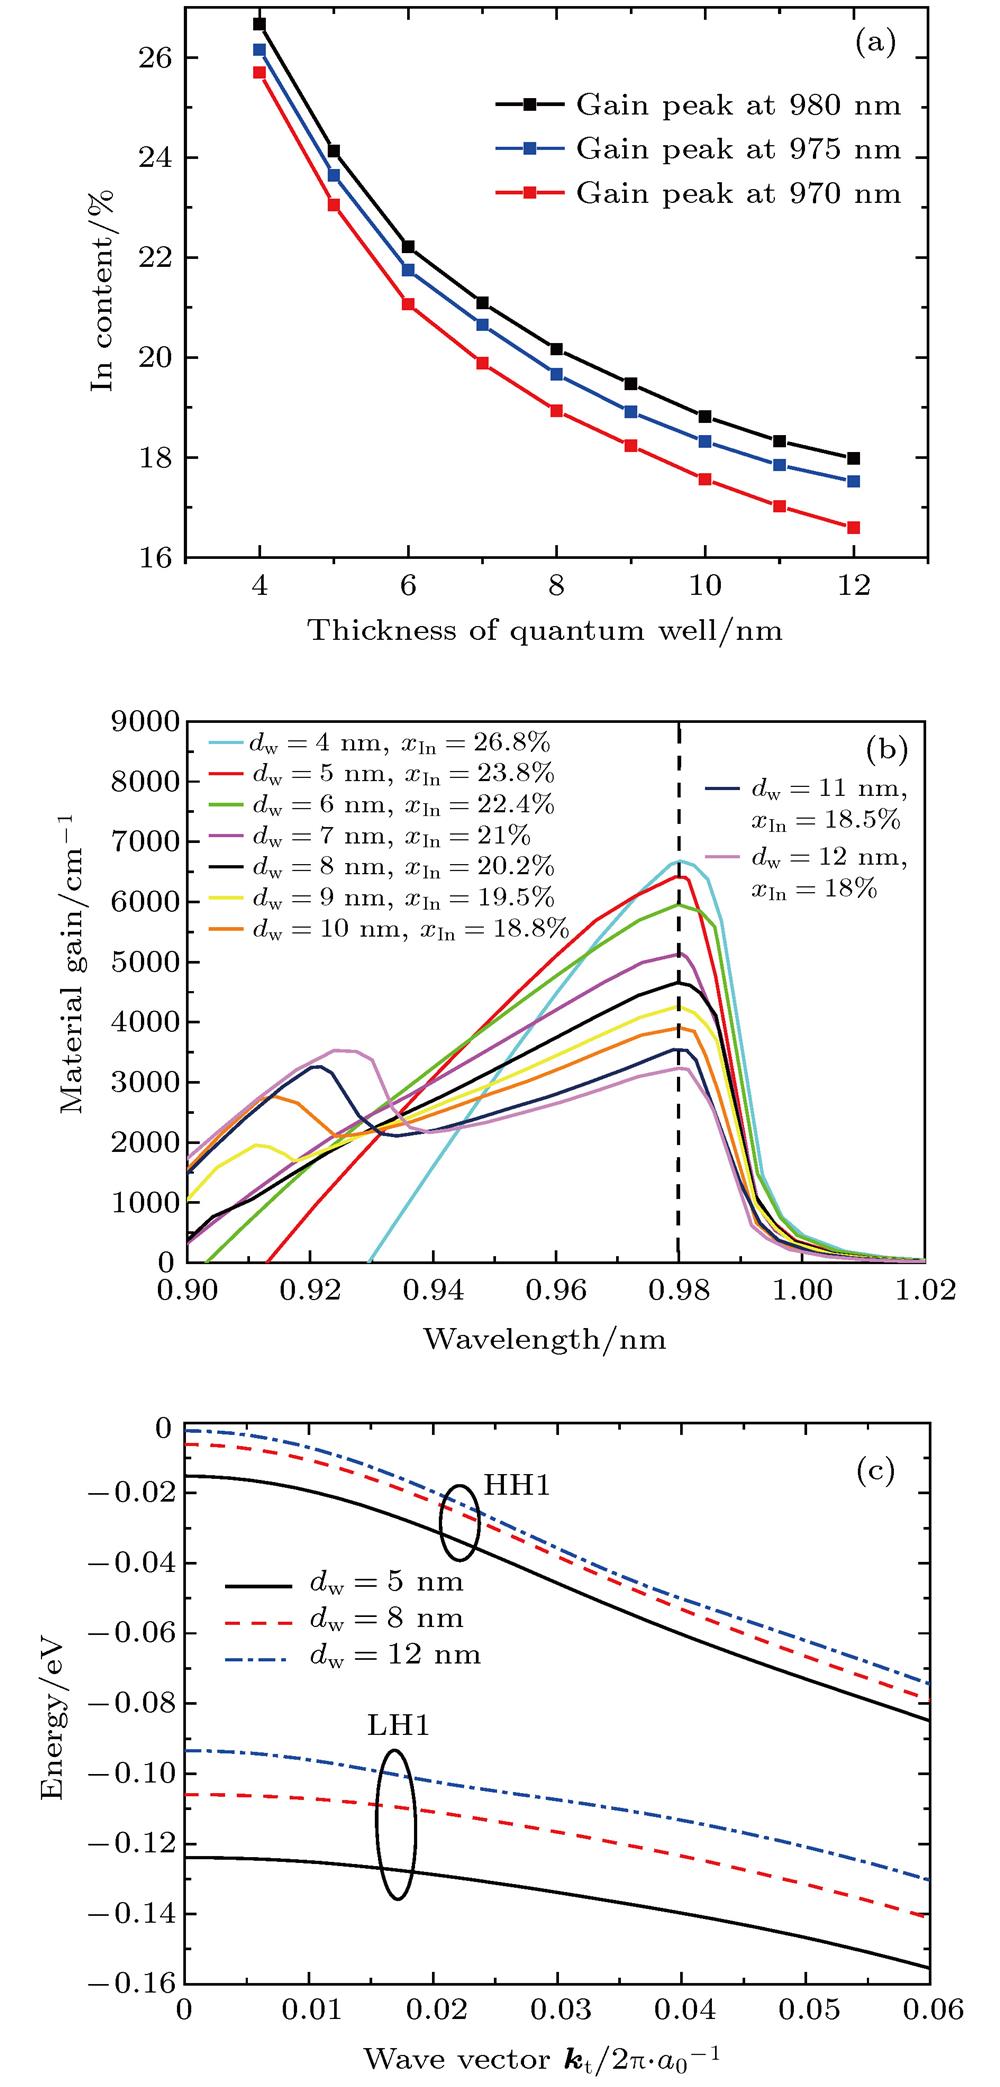 (a) Relationships between the In content and thickness of quantum wells when its emitting wavelength is 970, 975, 980 nm; (b) the gain spectra of different quantum wells with the same gain peak wavelength of 980 nm; (c) the valence subband structures of InGaAs QWs corresponding to a wavelength of 980 nm (HH1, the first heavy hole subband; LH1, the first light hole subband.).